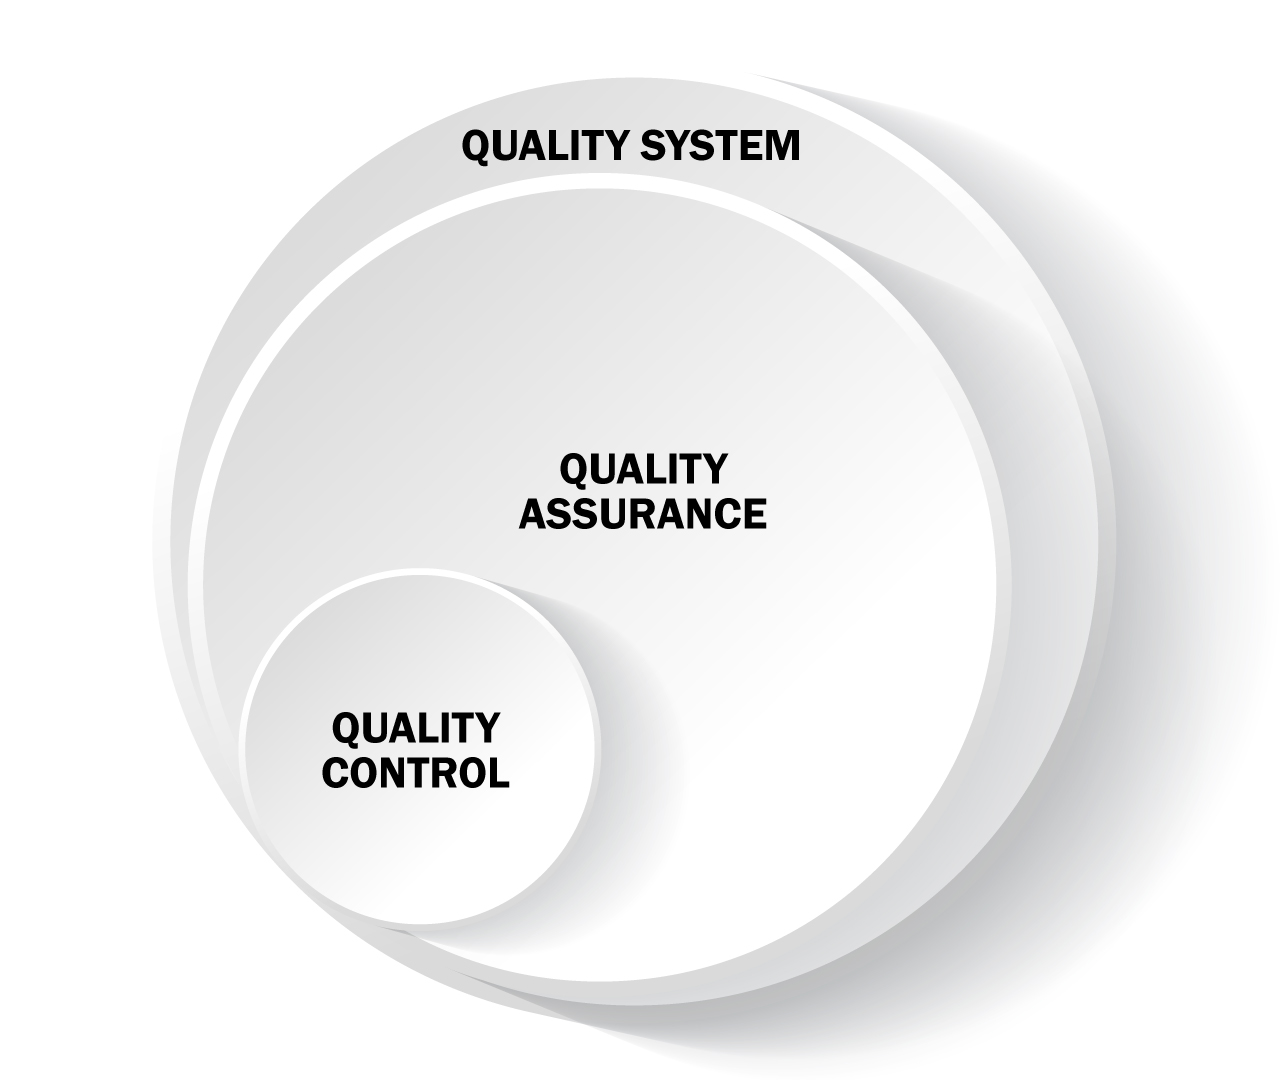 Demystifying The Difference Between Quality Control And Quality